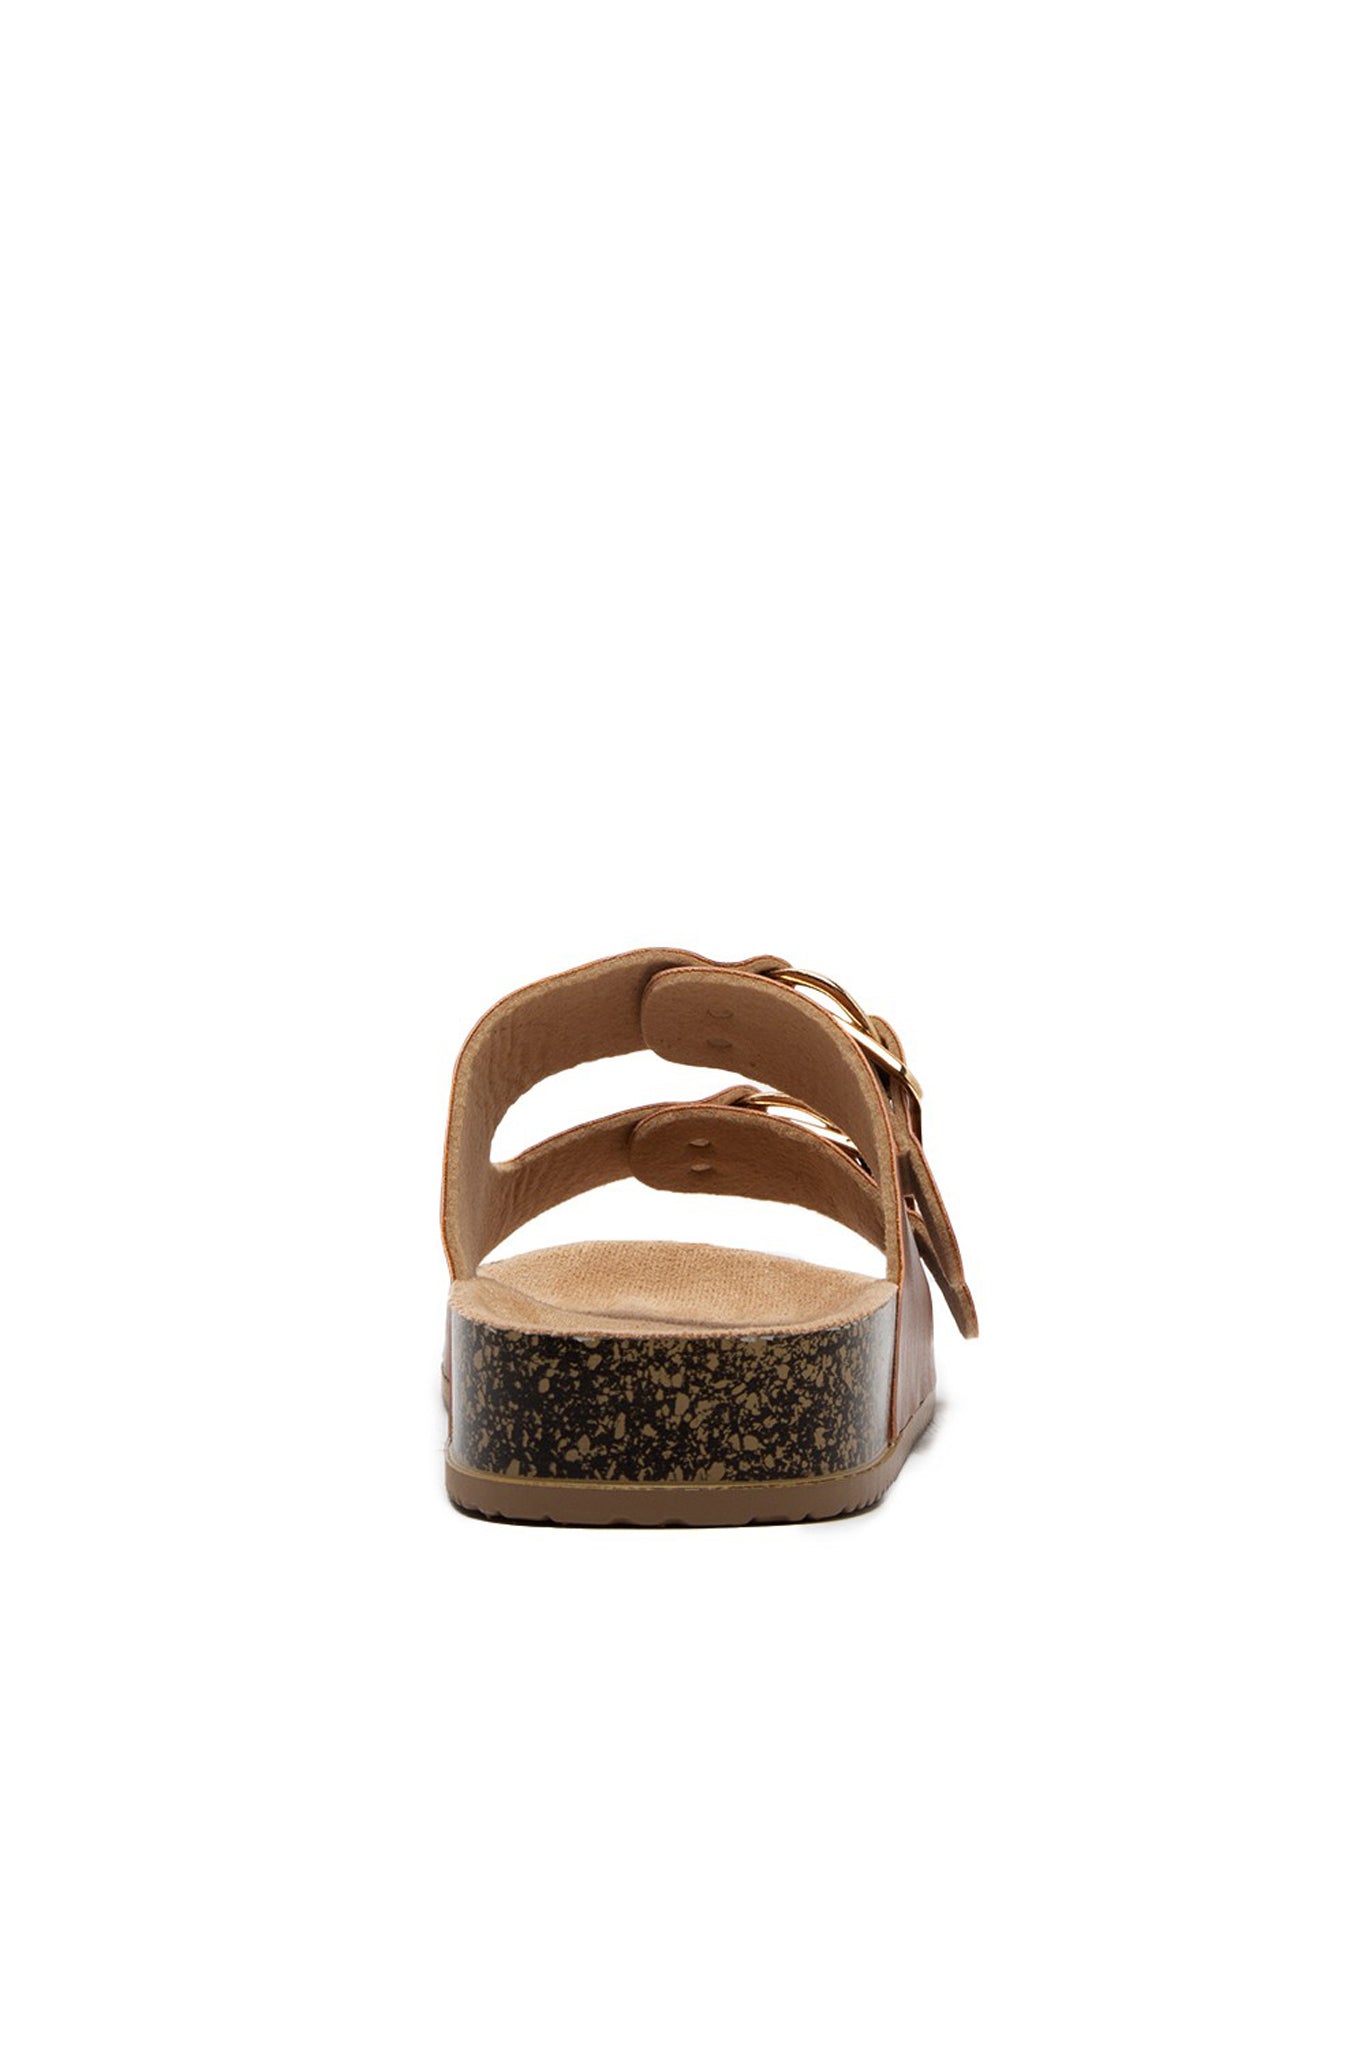 View 3 of Qupid Two Band Slide Sandal, a Shoes from Larrea Cove. Detail: .